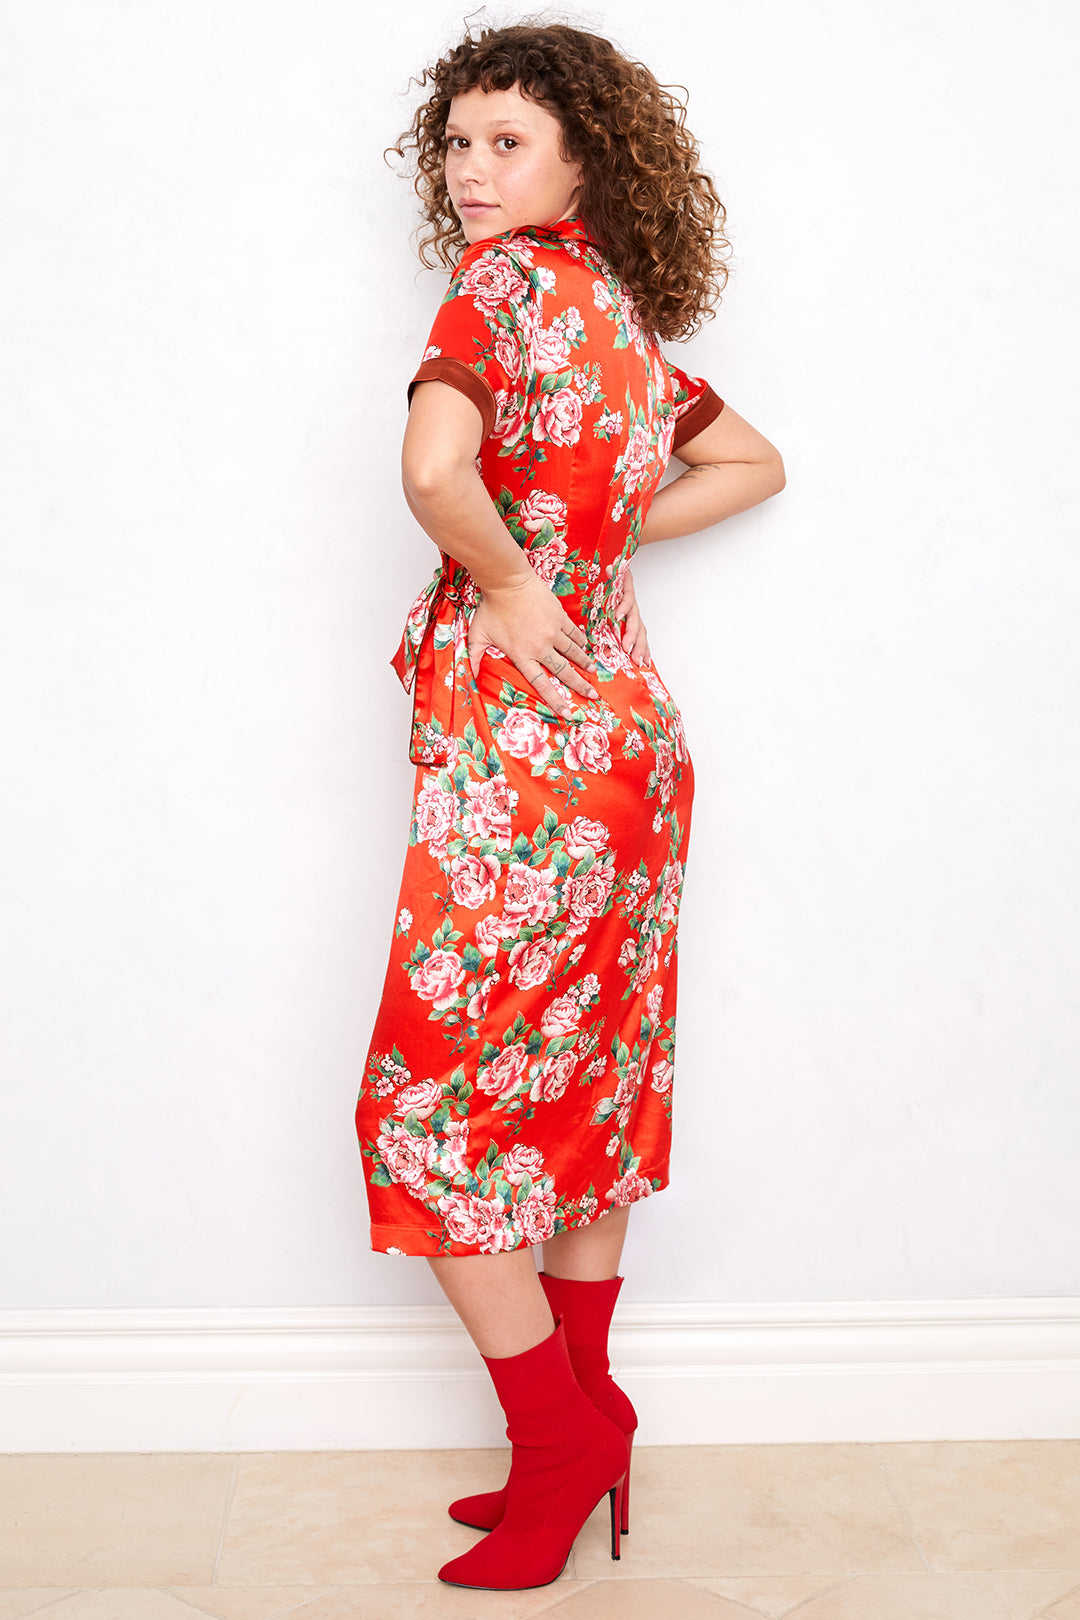 Perfectly Taylored Dress | SHAHbby Floral